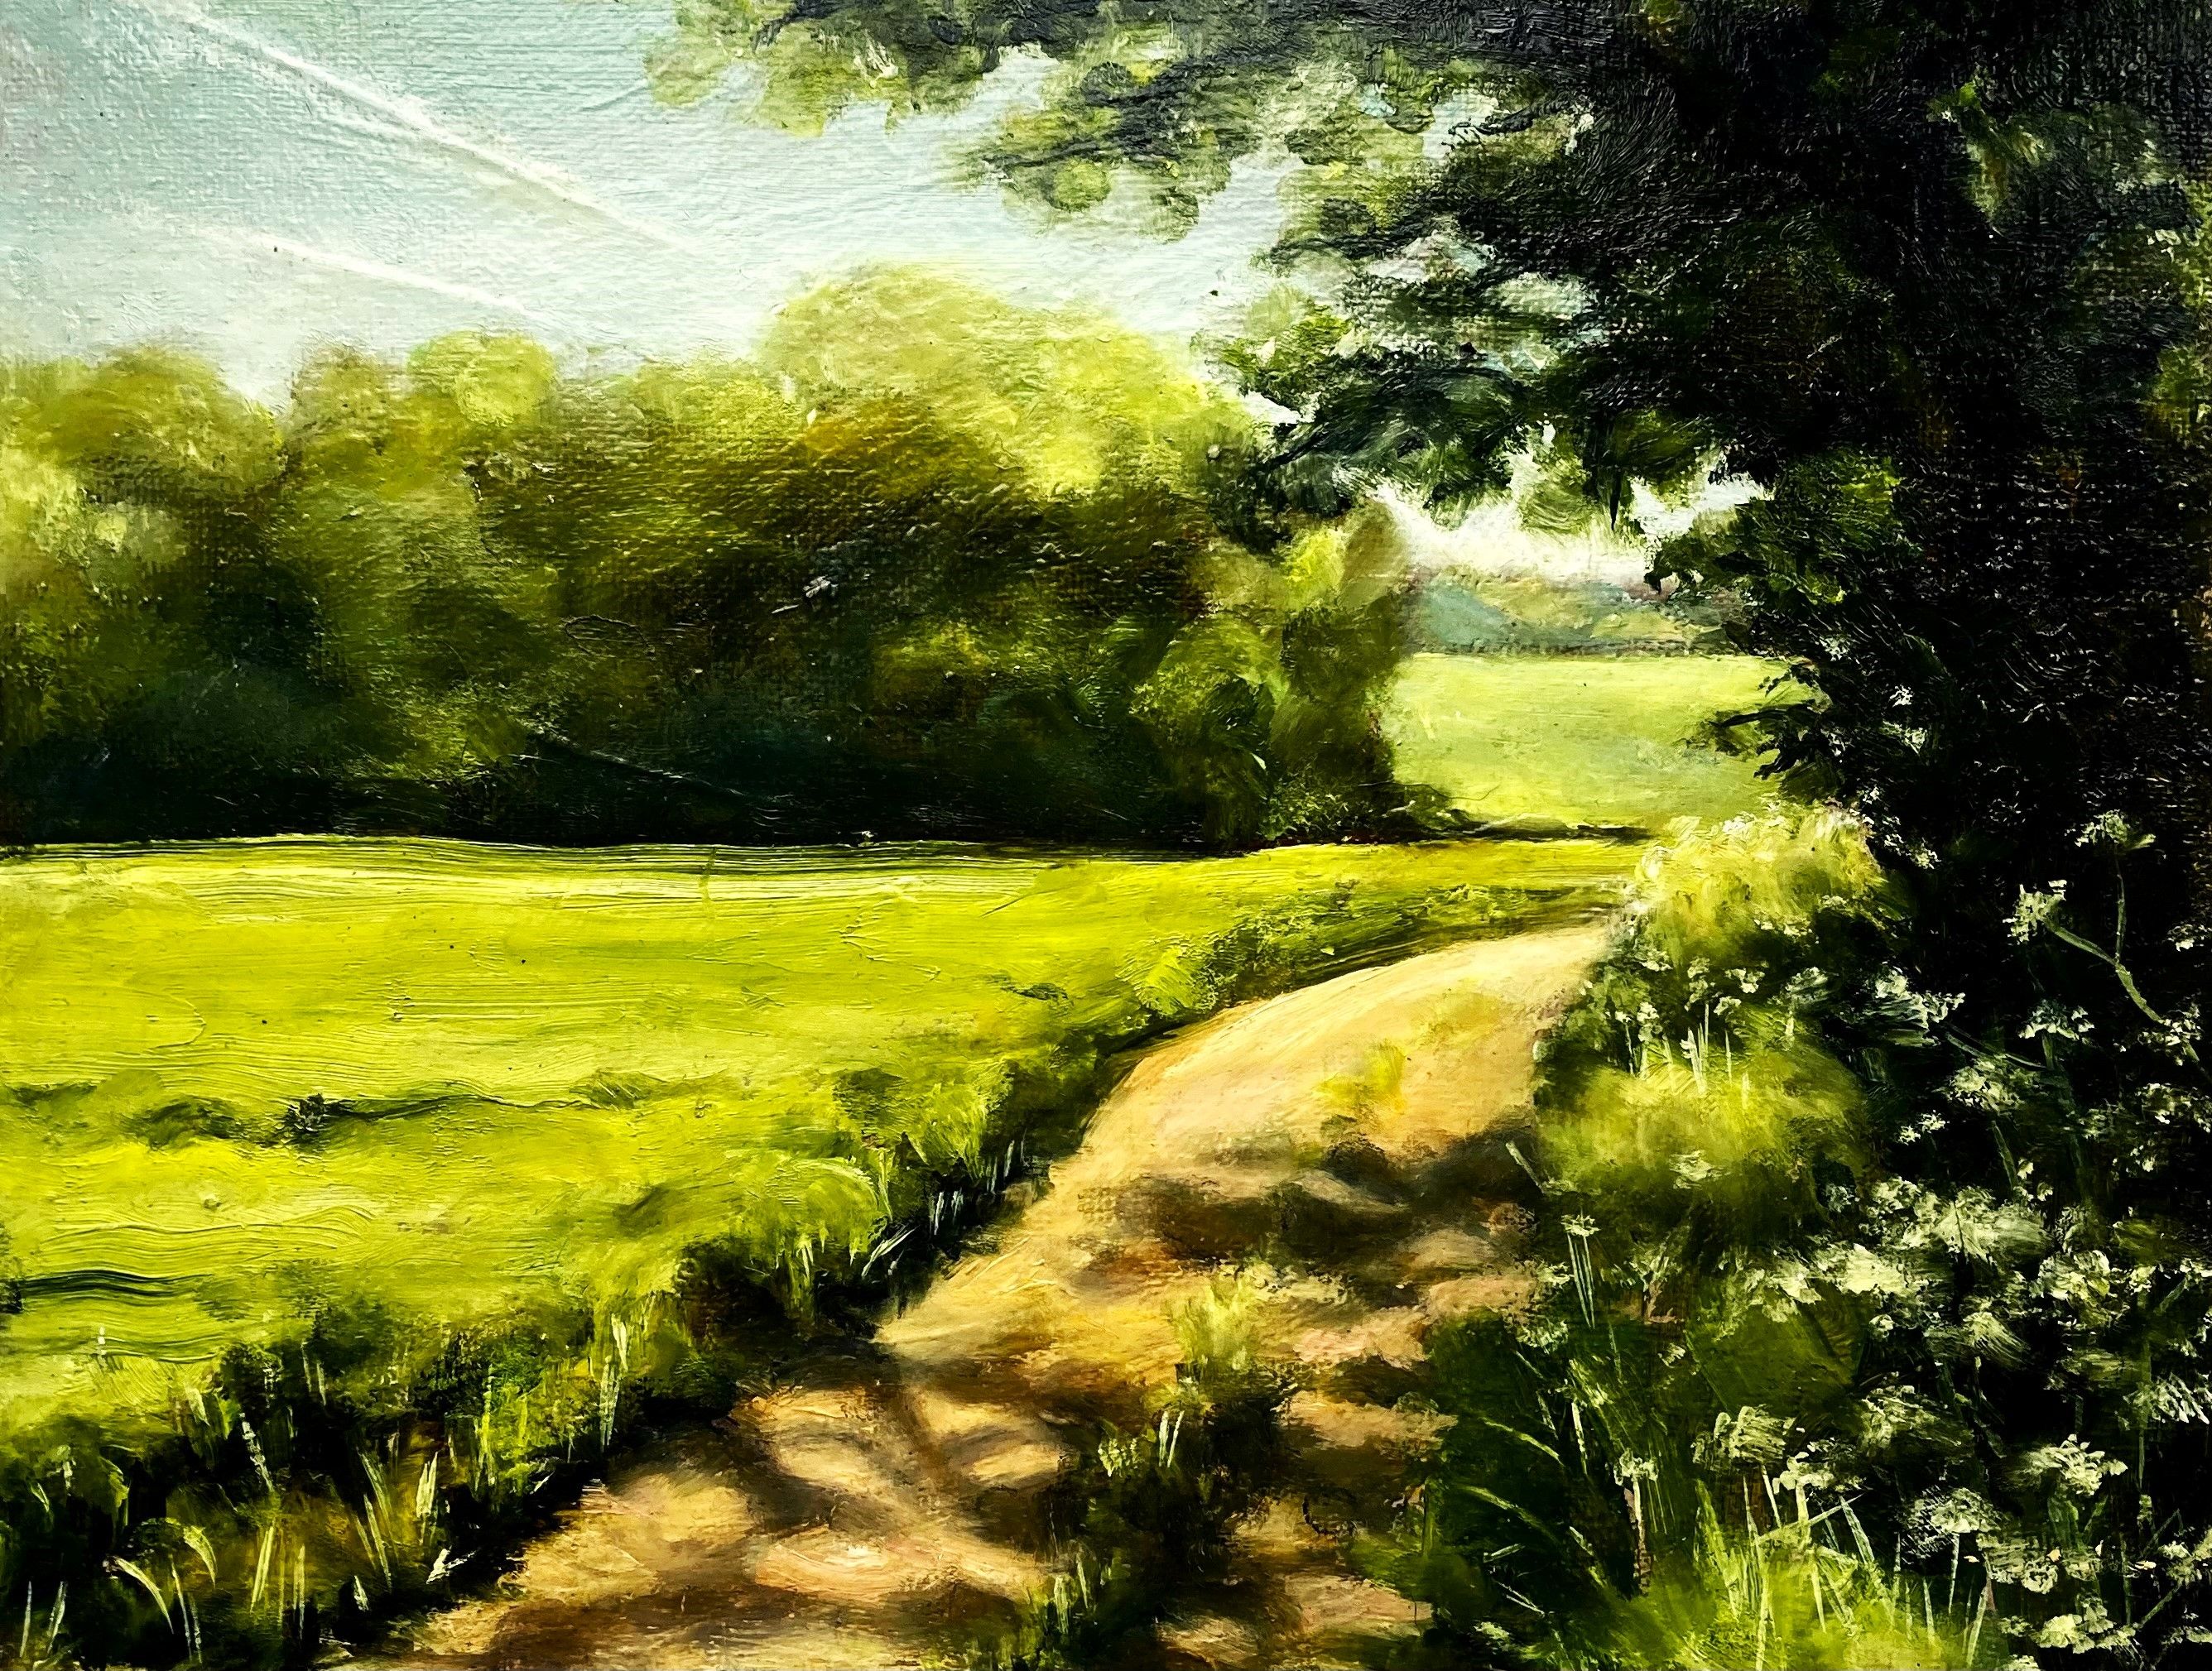 Swalcliffe, Oxfordshire - 'Sunday Afternoon' by Nicky Bramble - Secondary Image